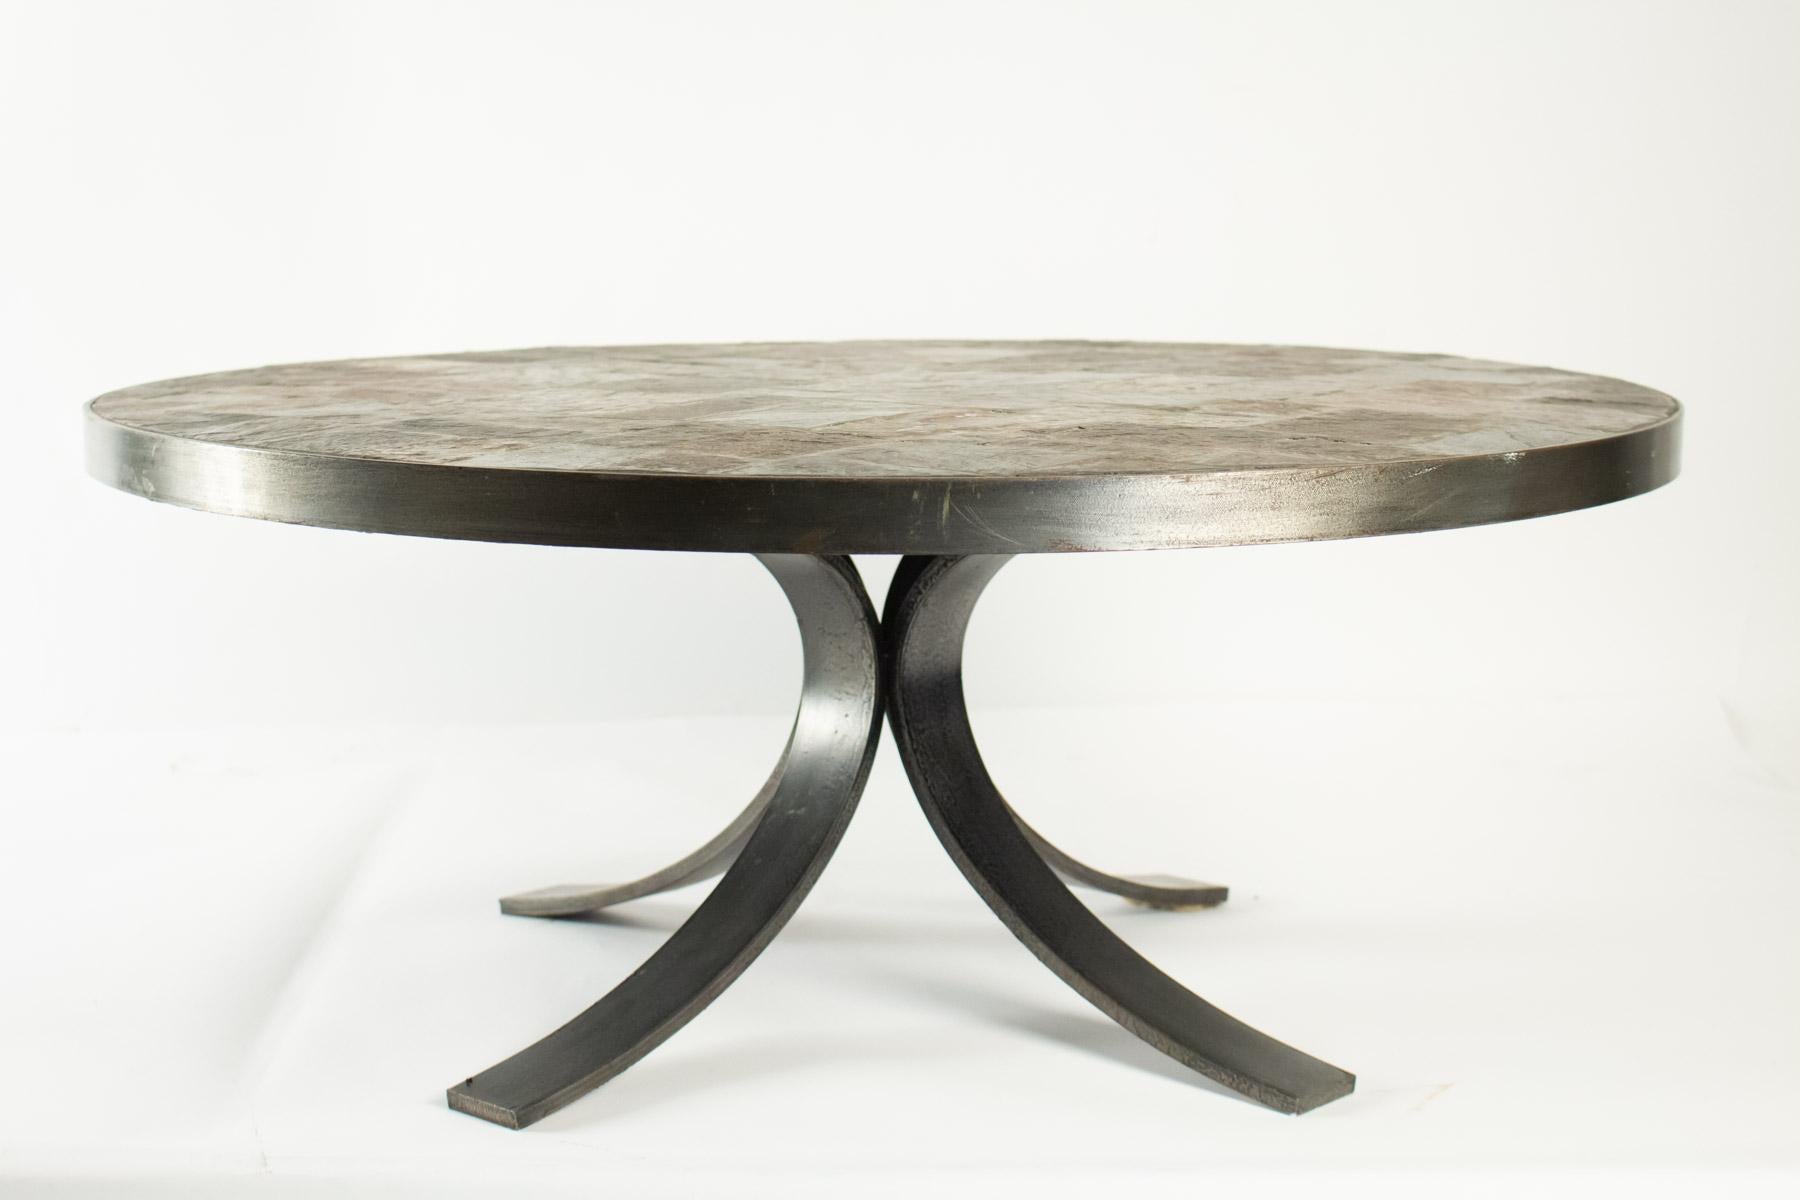 Round coffee table in wrought iron and stone from the Ardoise, circa 1960-1970
Measures: H 33 cm, D 80 cm.
  